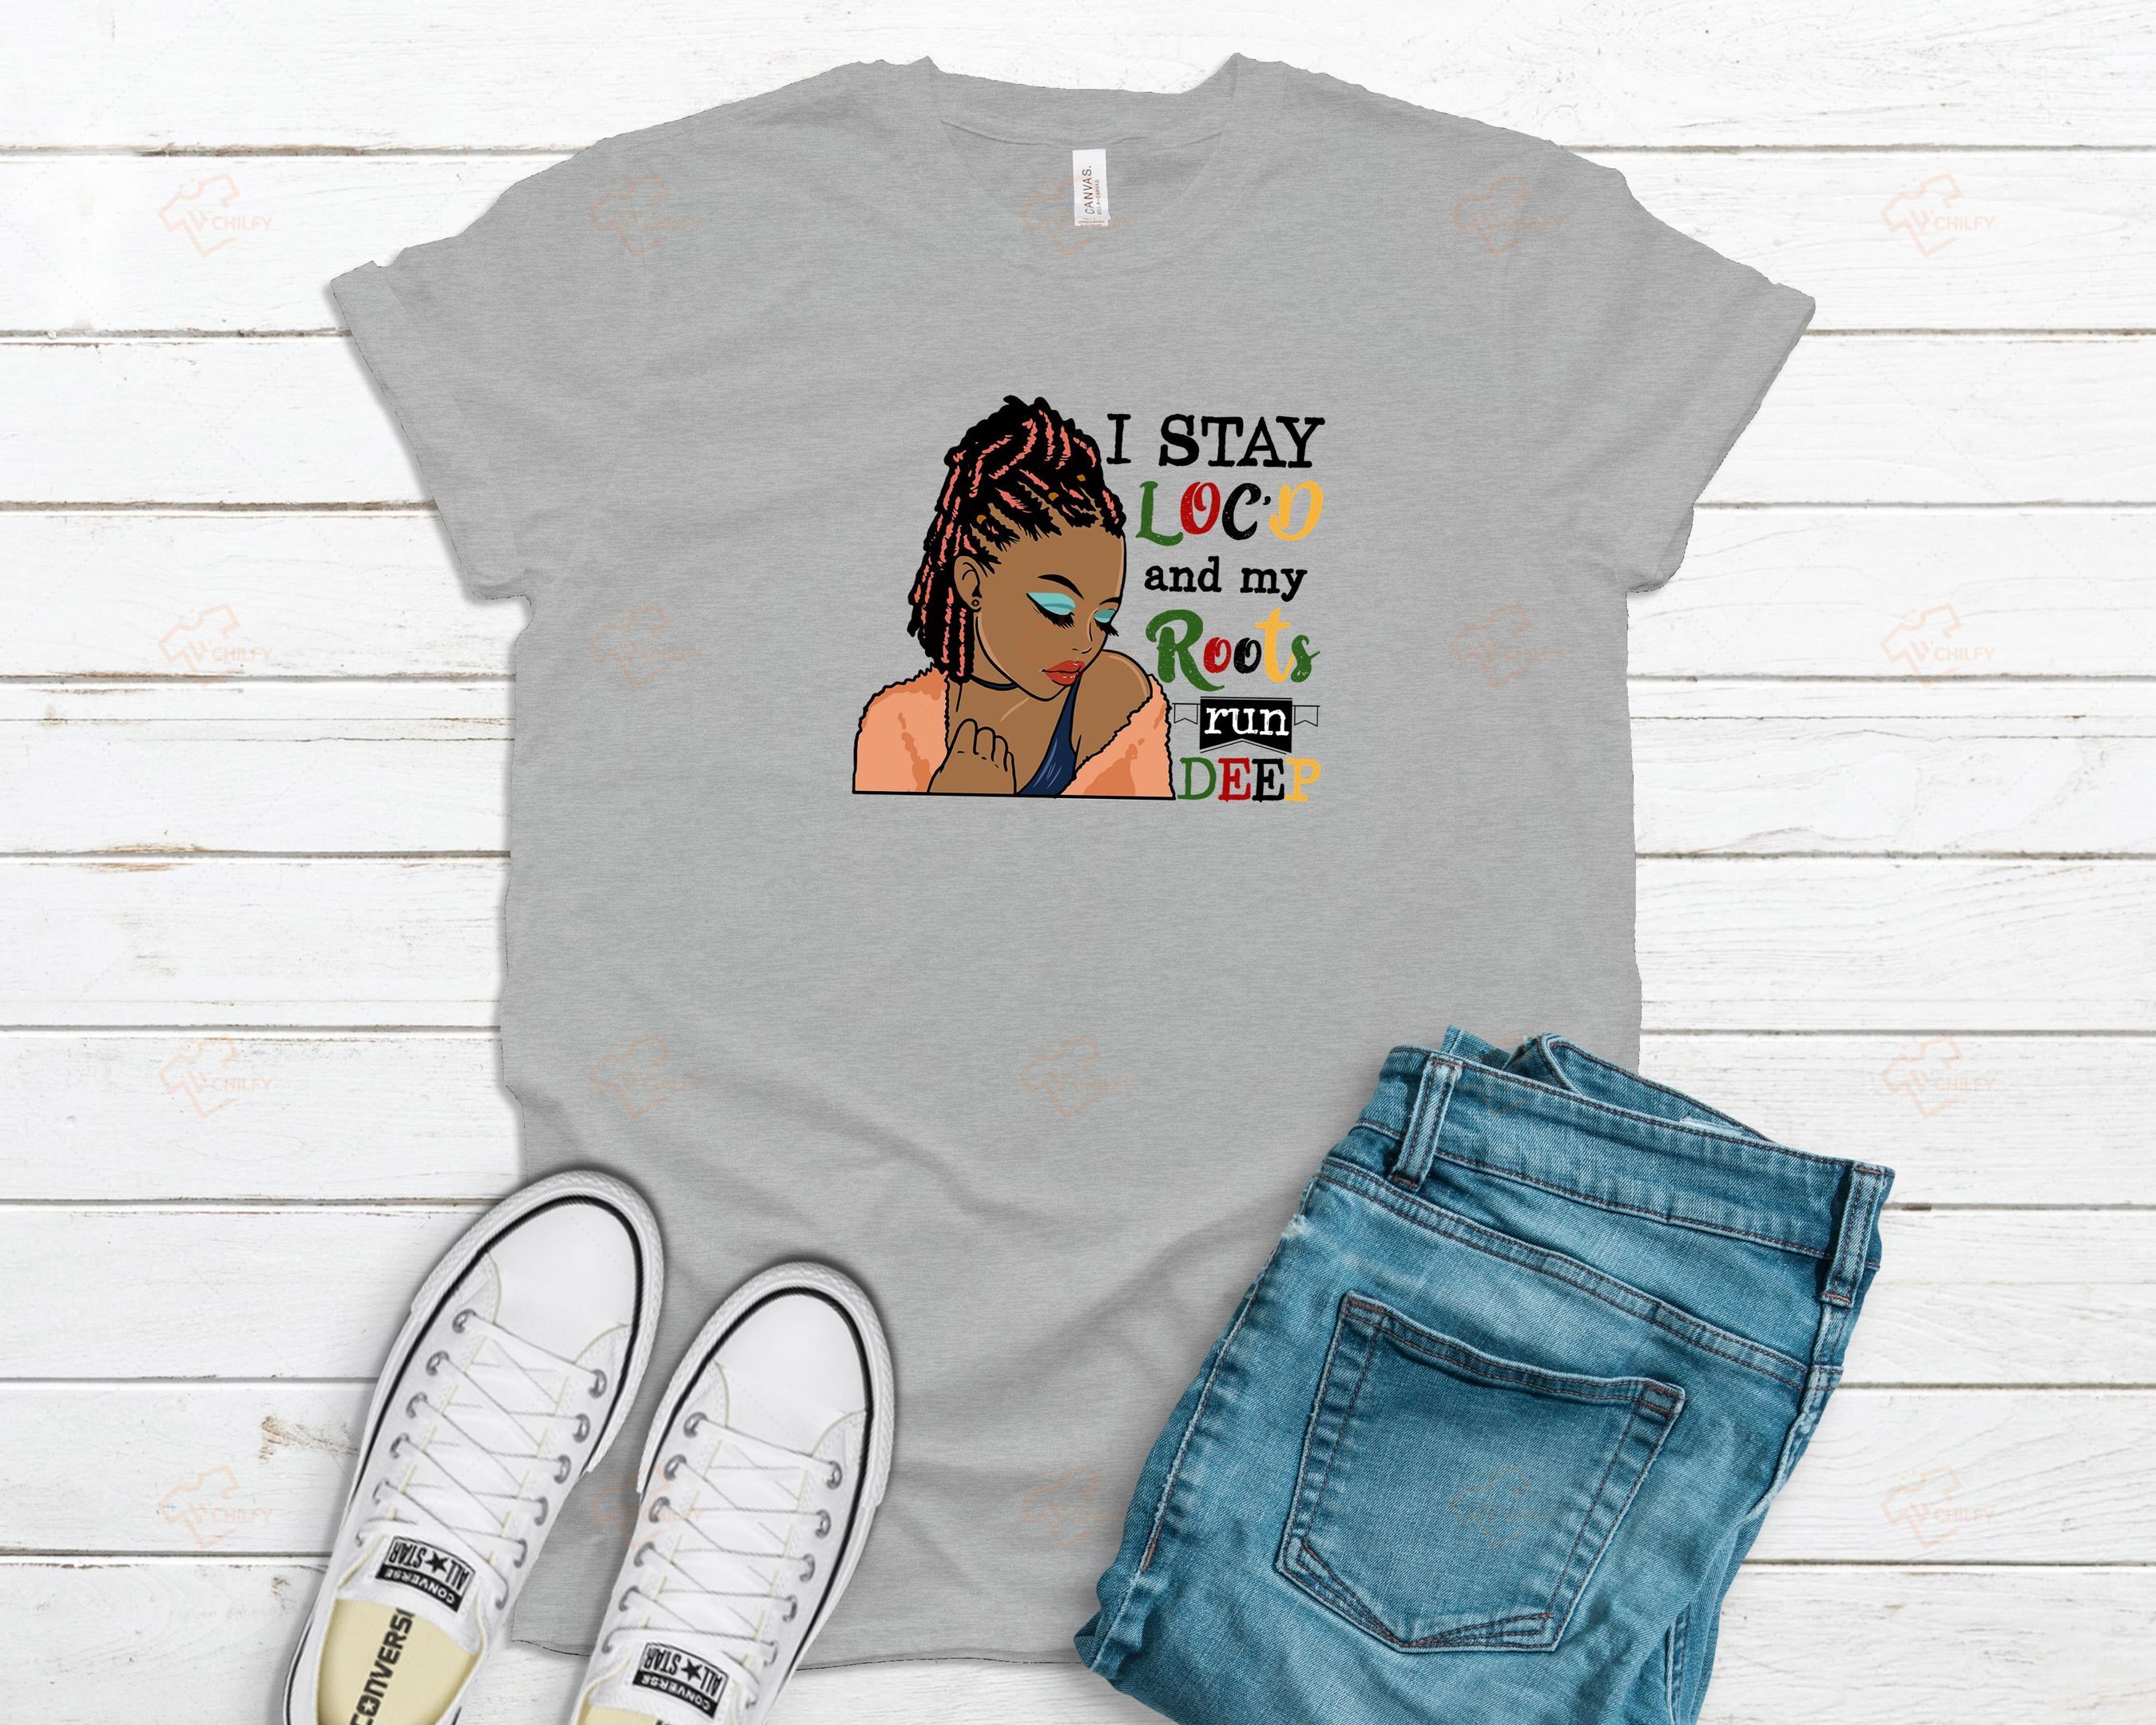 I stay loc’d and my roots run deep shirt, black and proud shirt